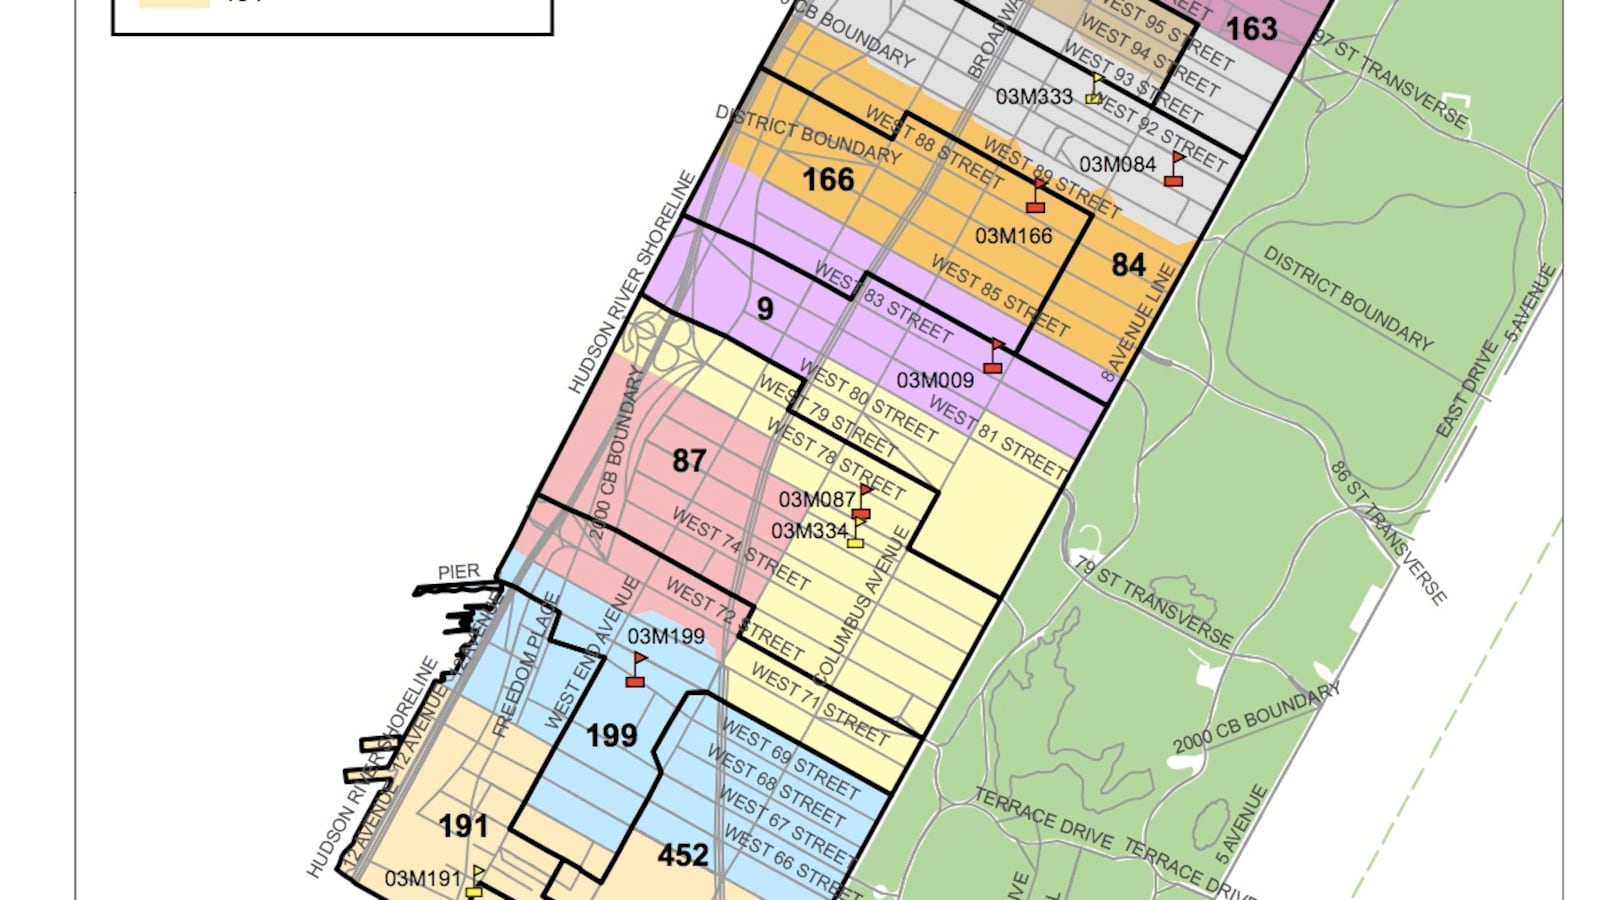 The city's final plan for rezoning District 3.